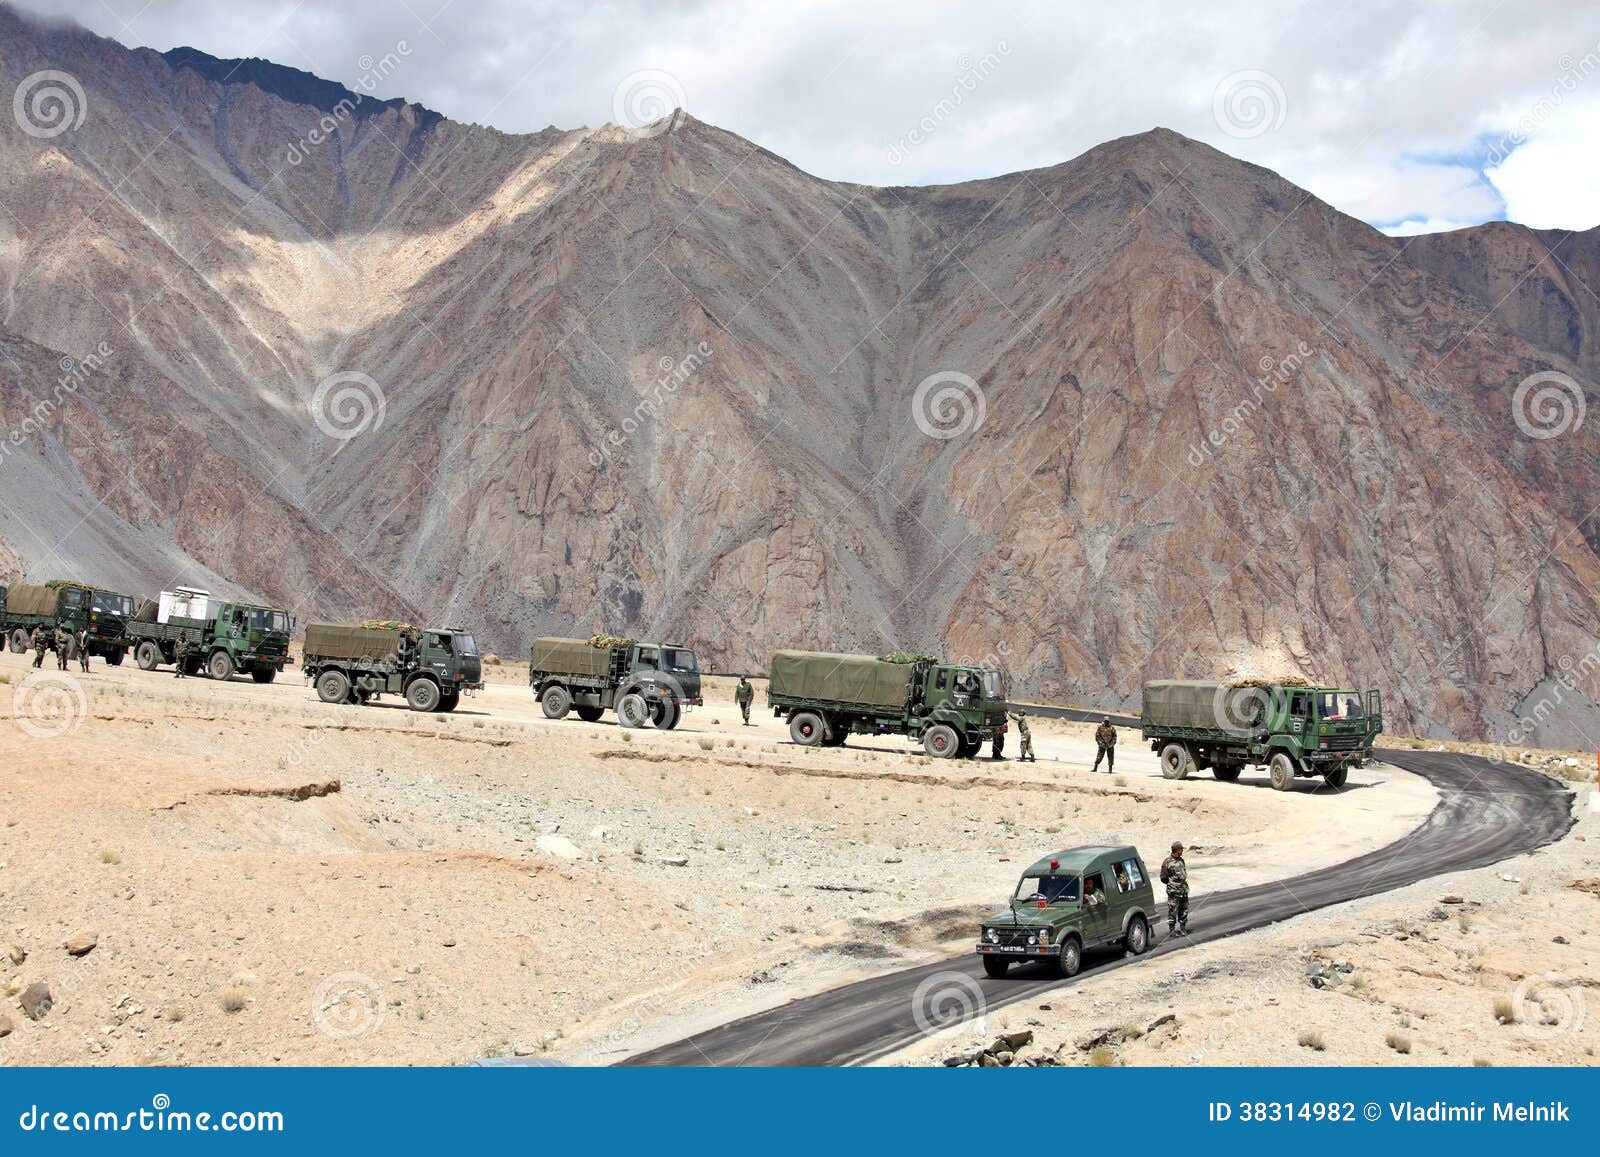 indian-army-convoy-trucks-jammu-kashmir-india-september-delivering-supplies-to-remote-military-installations-himalayas-38314982.jpg